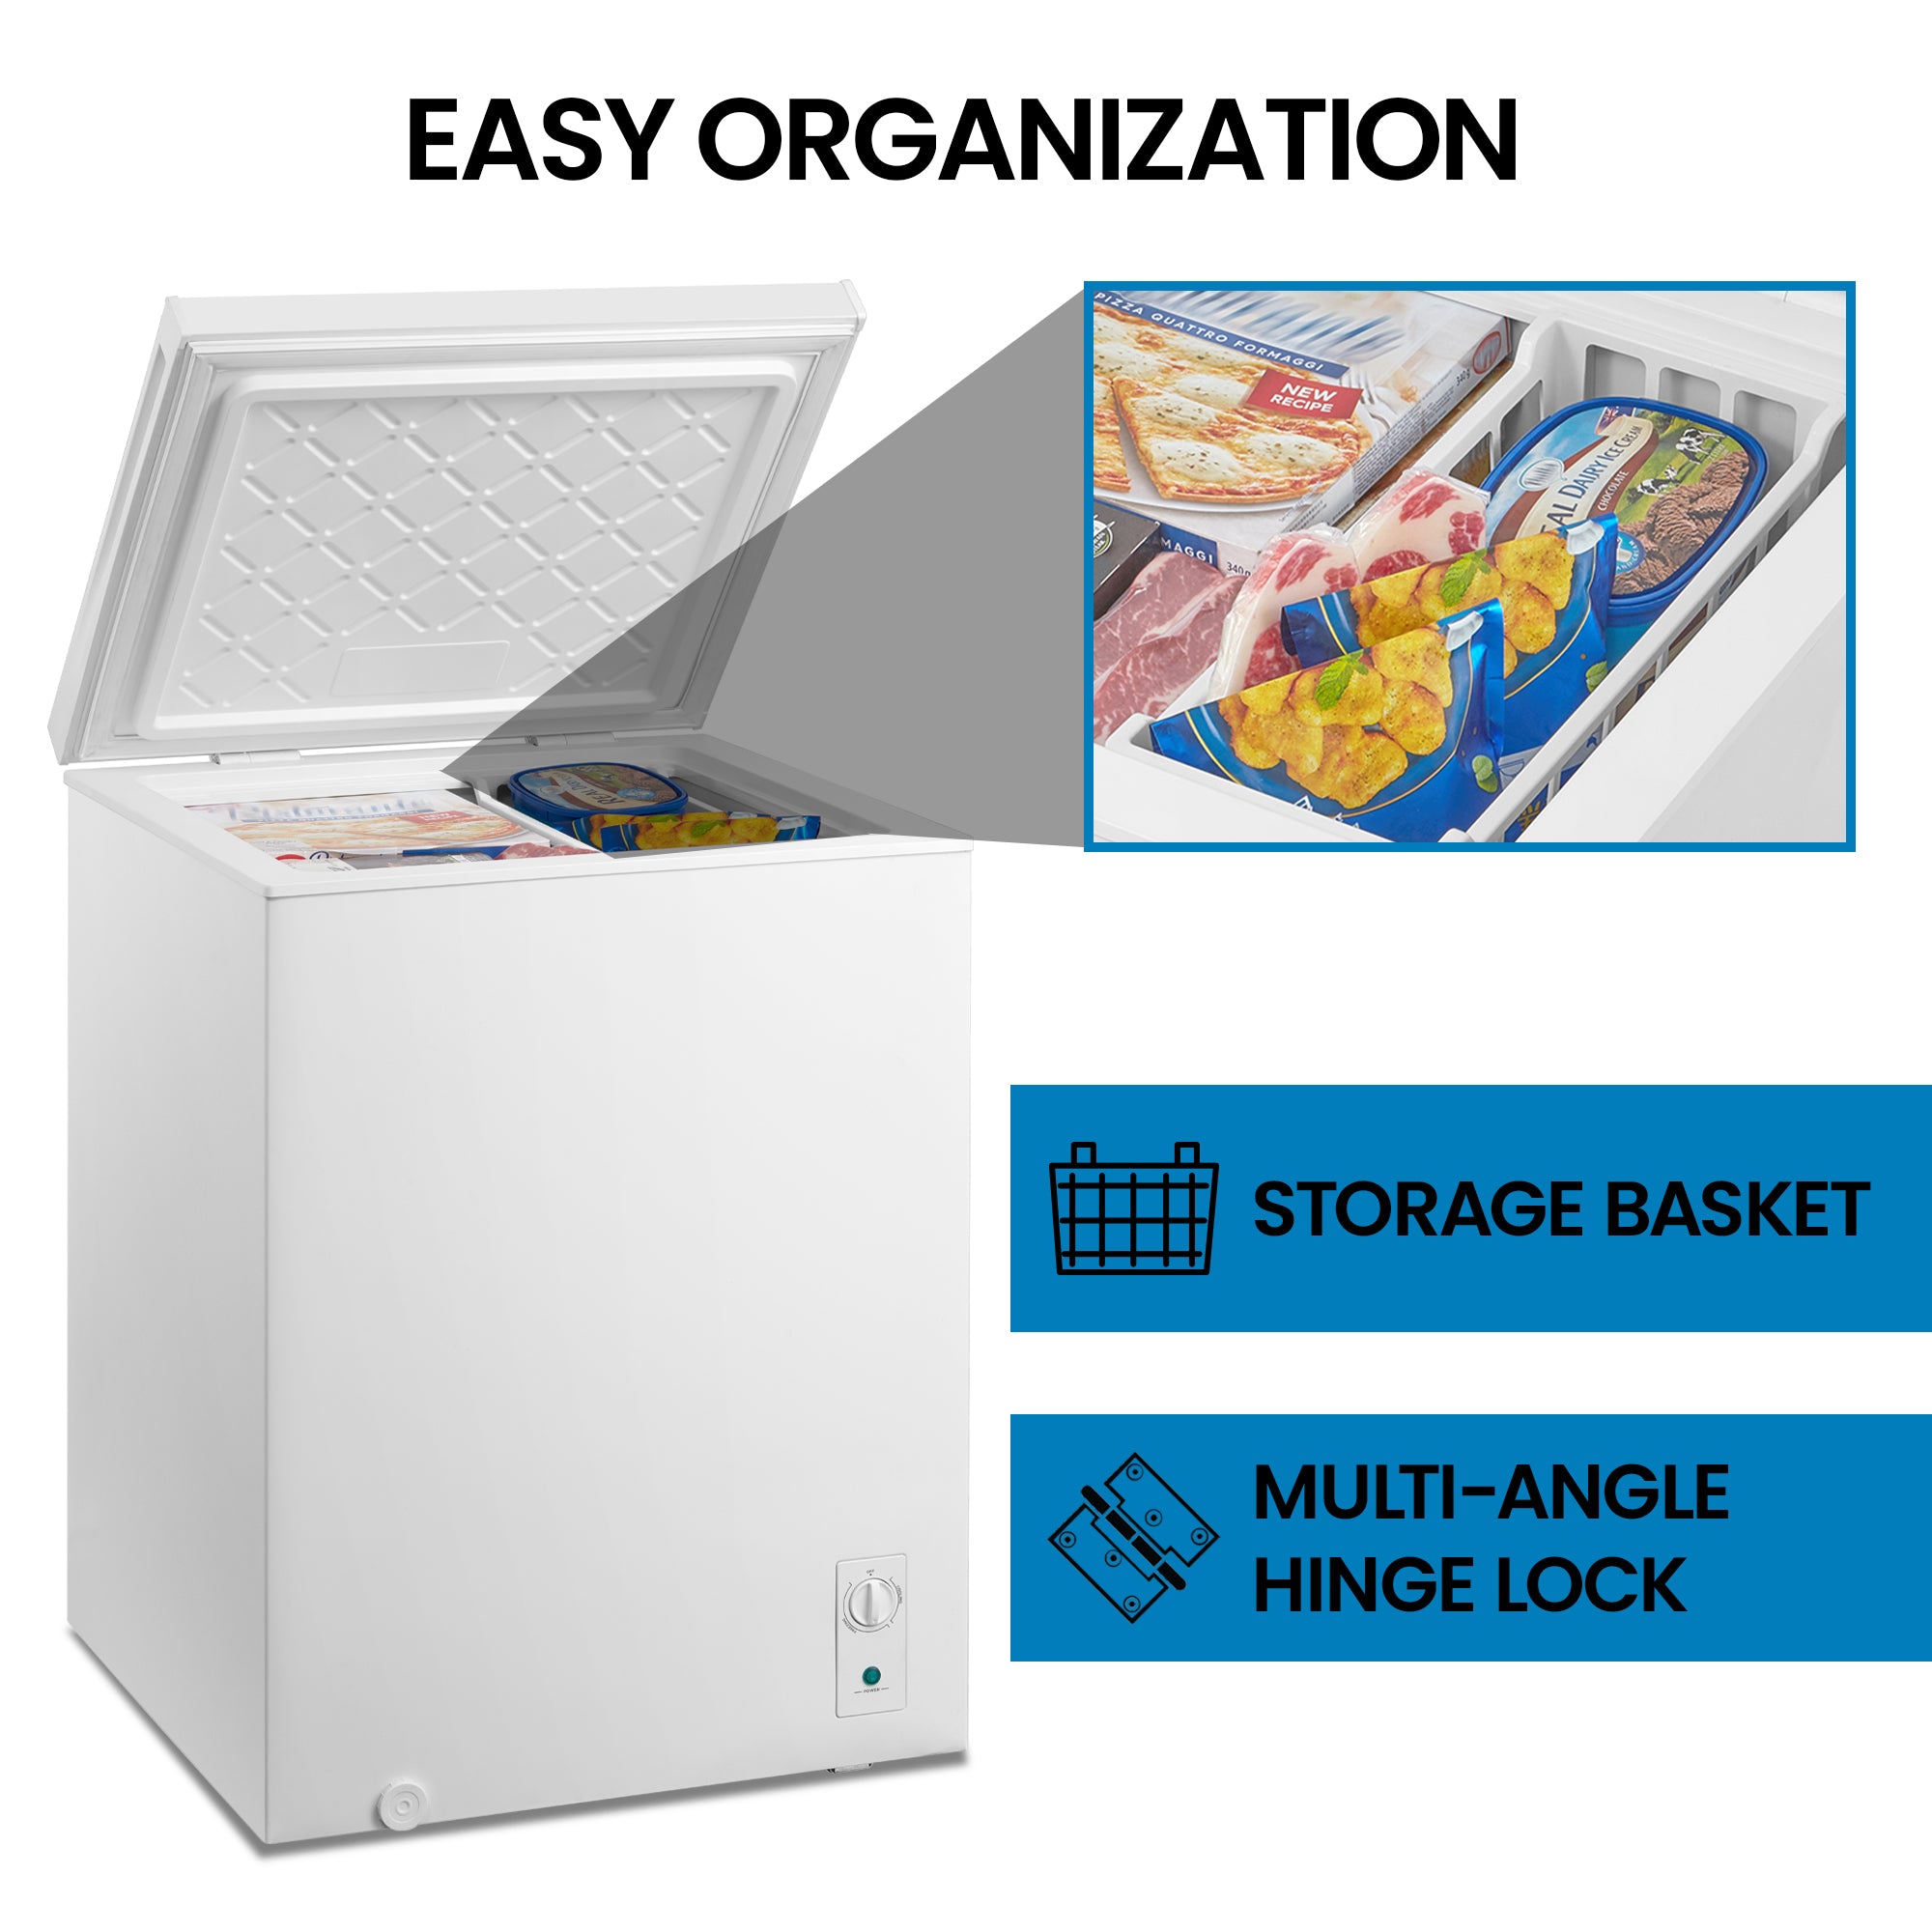 Kenmore convertible deep freeze, open and filled with food items, on a white background with an inset closeup showing the storage basket. Text above reads, "Easy organization," and text below reads, "Removable hanging basket; multi-angle hinge lock"